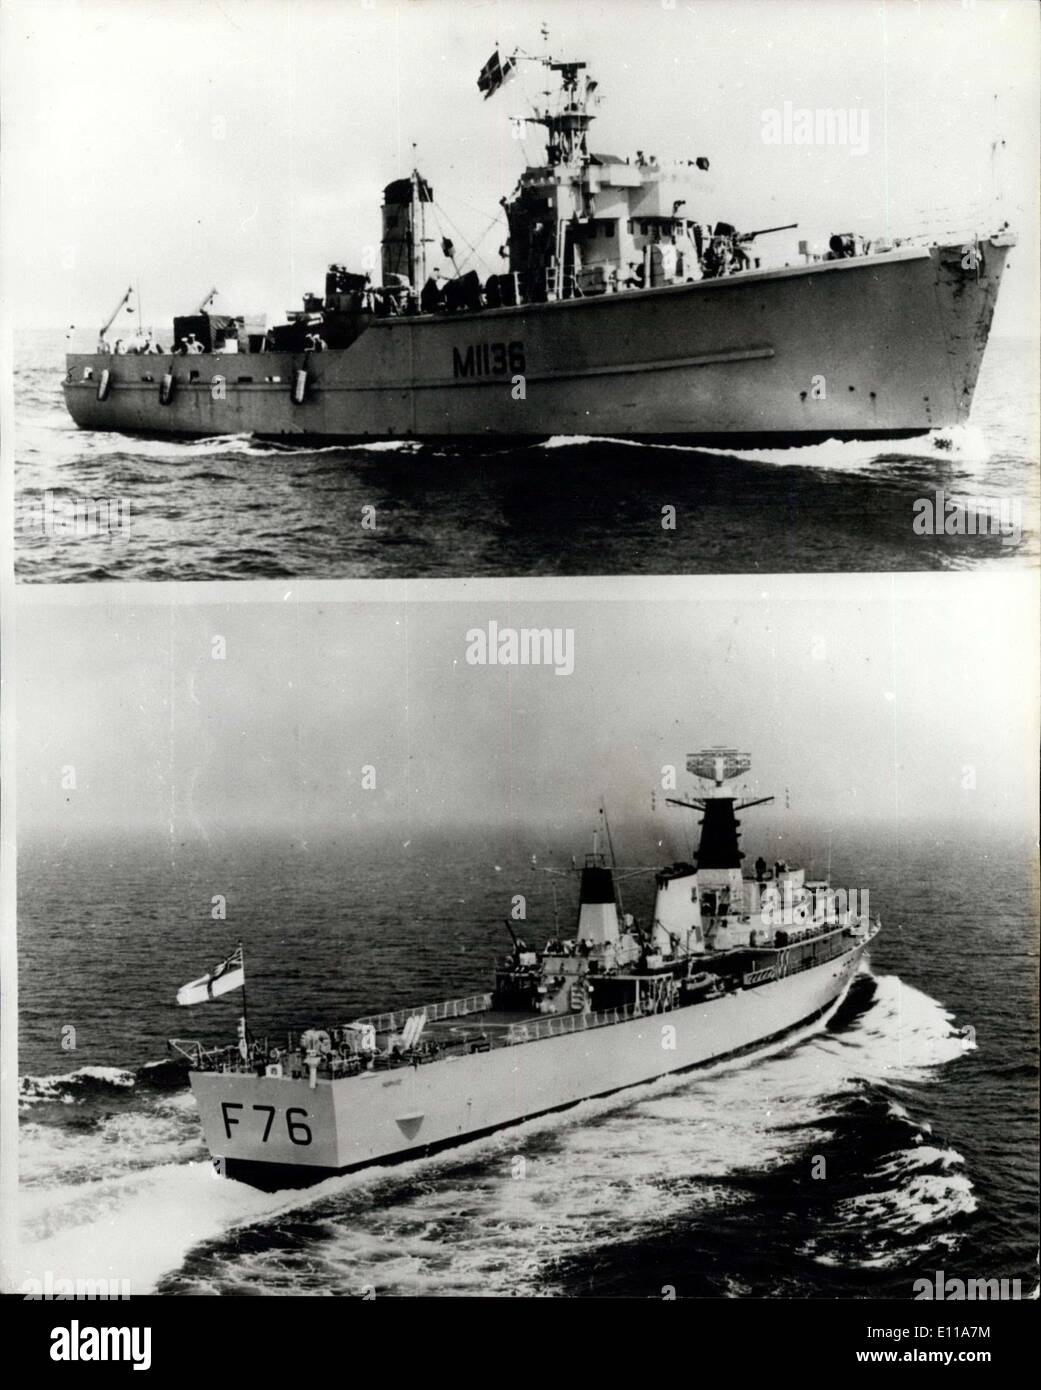 Sep. 21, 1976 - Two sailors were killed and ten were missing last night after the Royal Naval Reserve minesweeper Fittleton, 360 tons, collided off northern Holland with the Royal Navy frigate, Mermaid, 2,300 tons. All the casualties were from the Fittleton, which capsized and sank. Thirty two survivors from the Fittleton, three of them injured, were picked up by the Mermaid, which was virtually undamaged. Both ships were taking part in the massive NATO exercise ''Teamwork'', which involves 80,000 personnel, 275 ships and 900 aircraft from nine countries Stock Photo